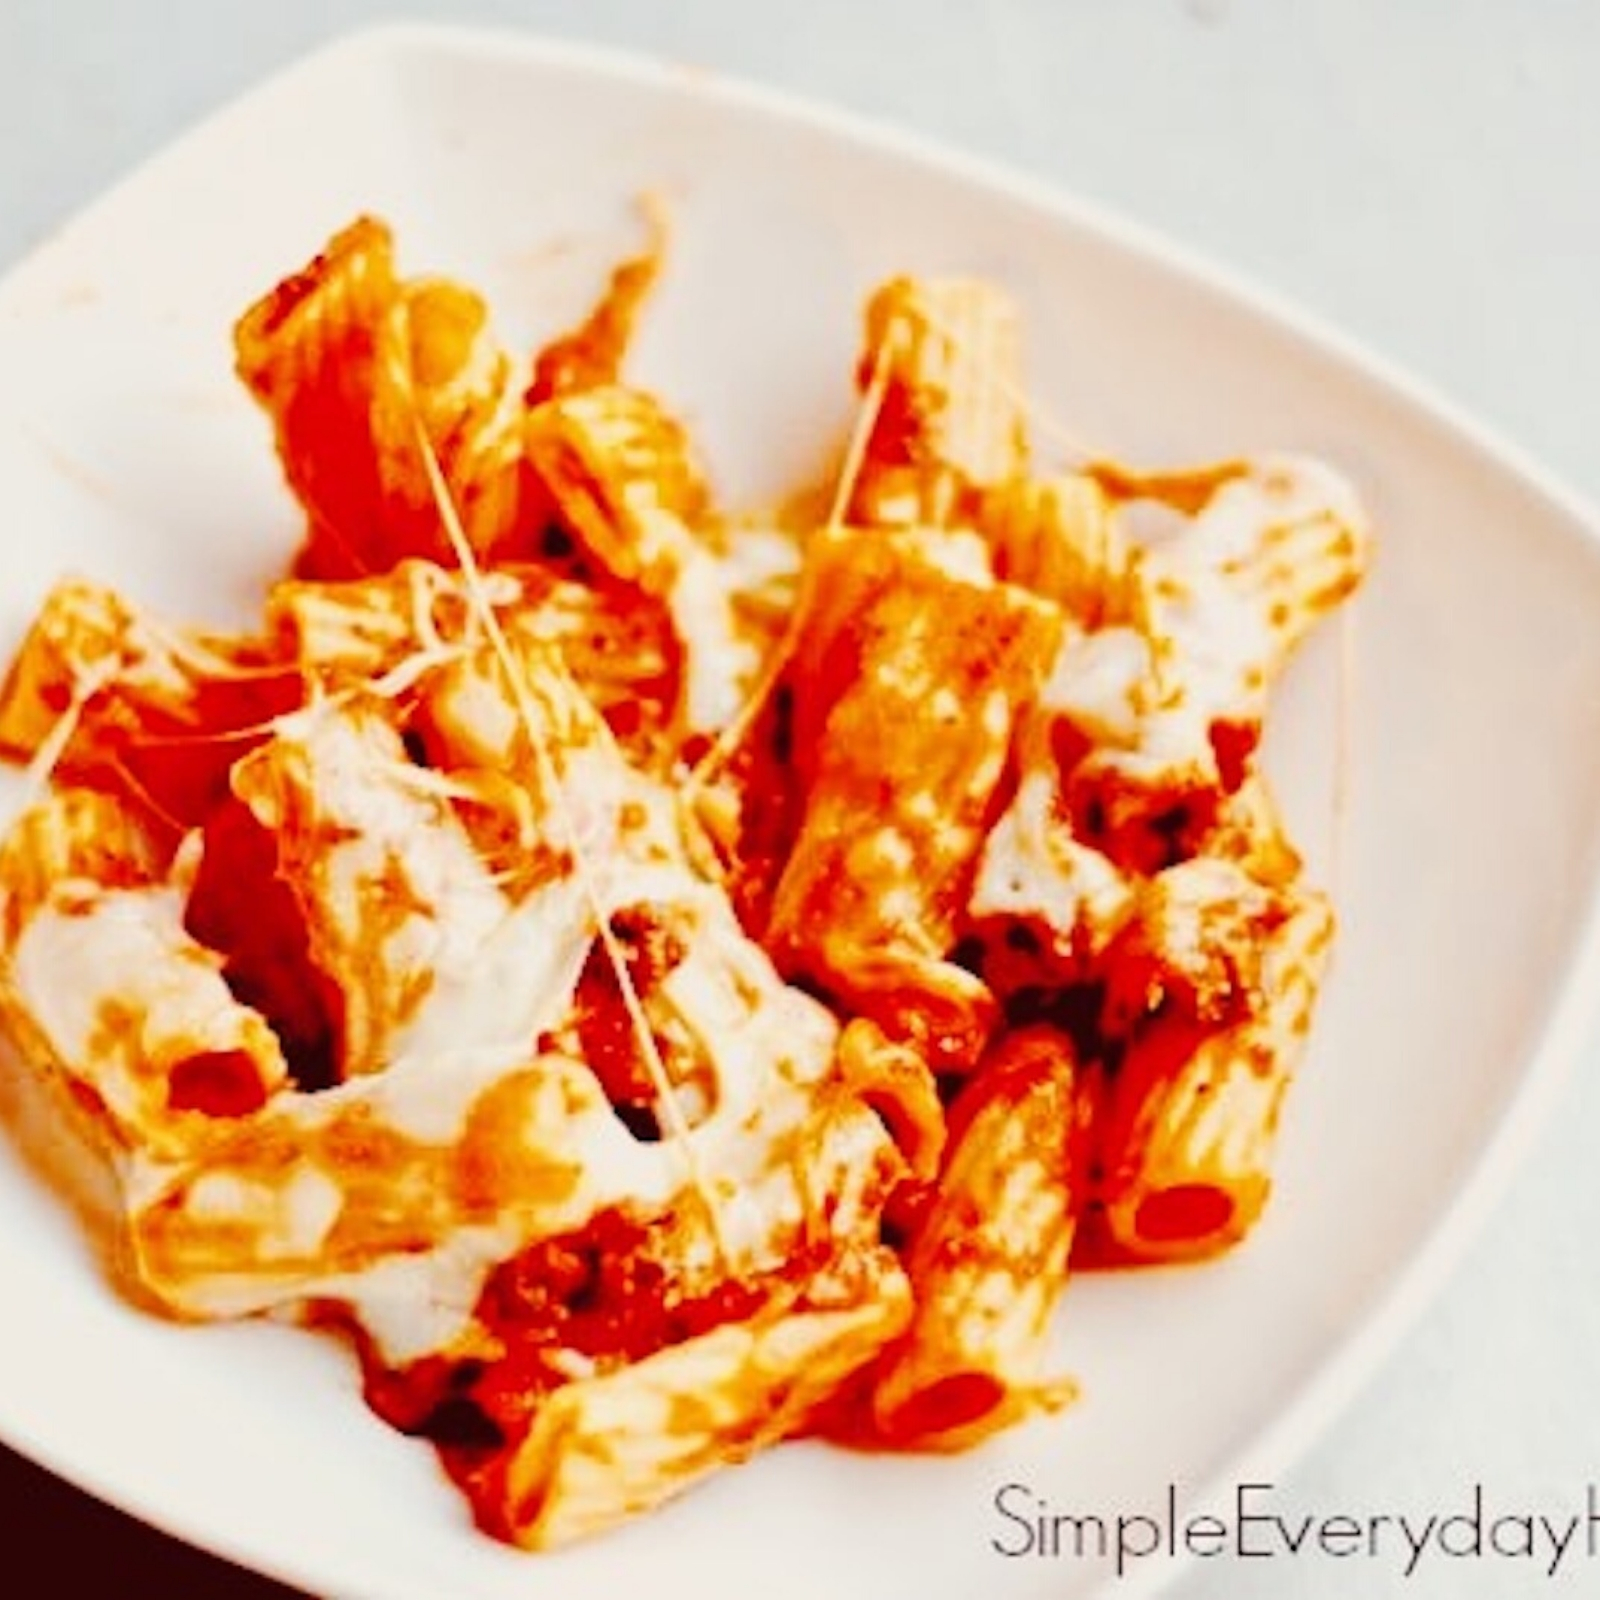 Easy and Delicious Baked Rigatoni Recipe